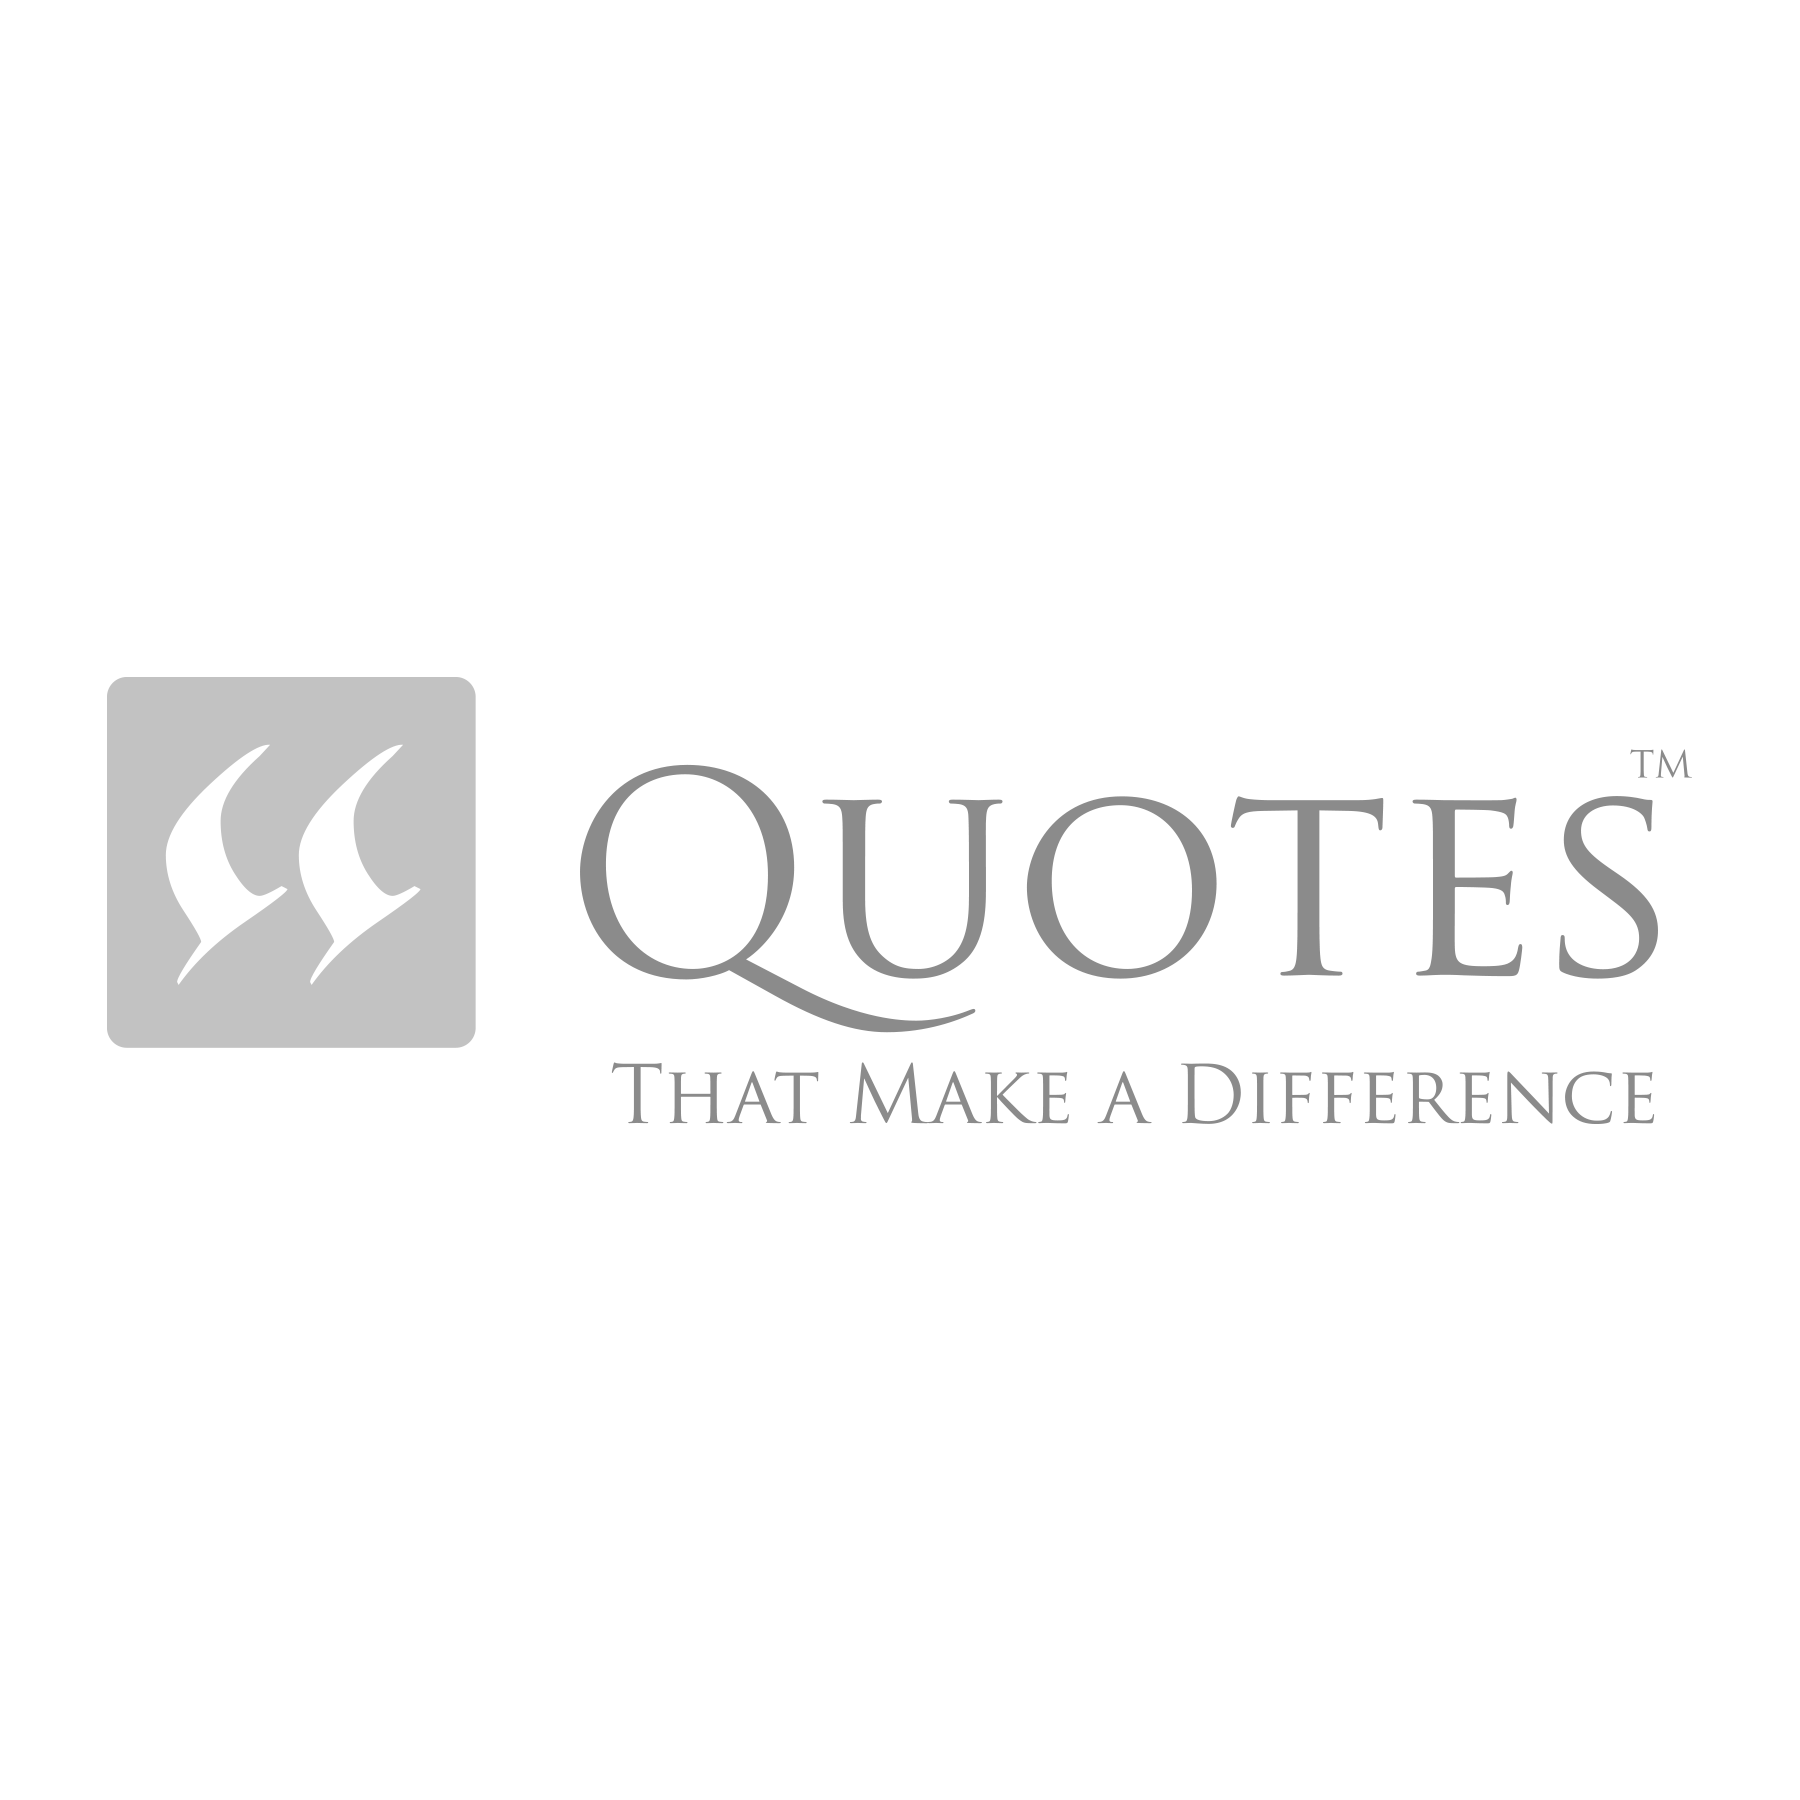 quotes bw - Quotes That Make a difference